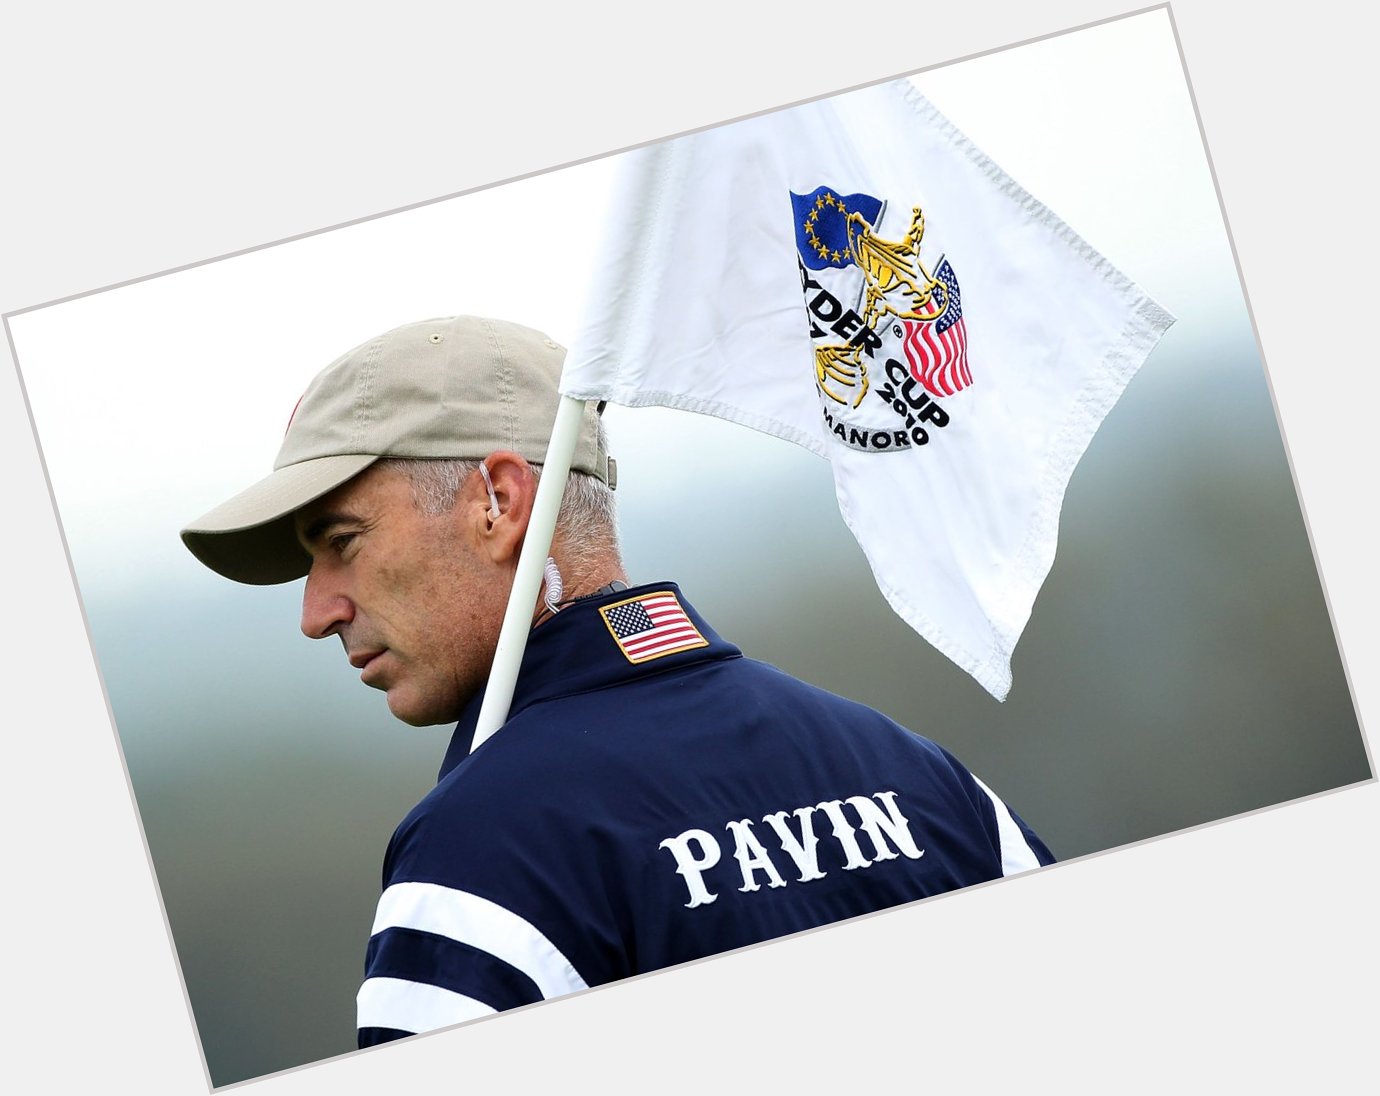 Happy birthday to our 2010 Captain and a 3-time member of the United States Team, Corey Pavin. 